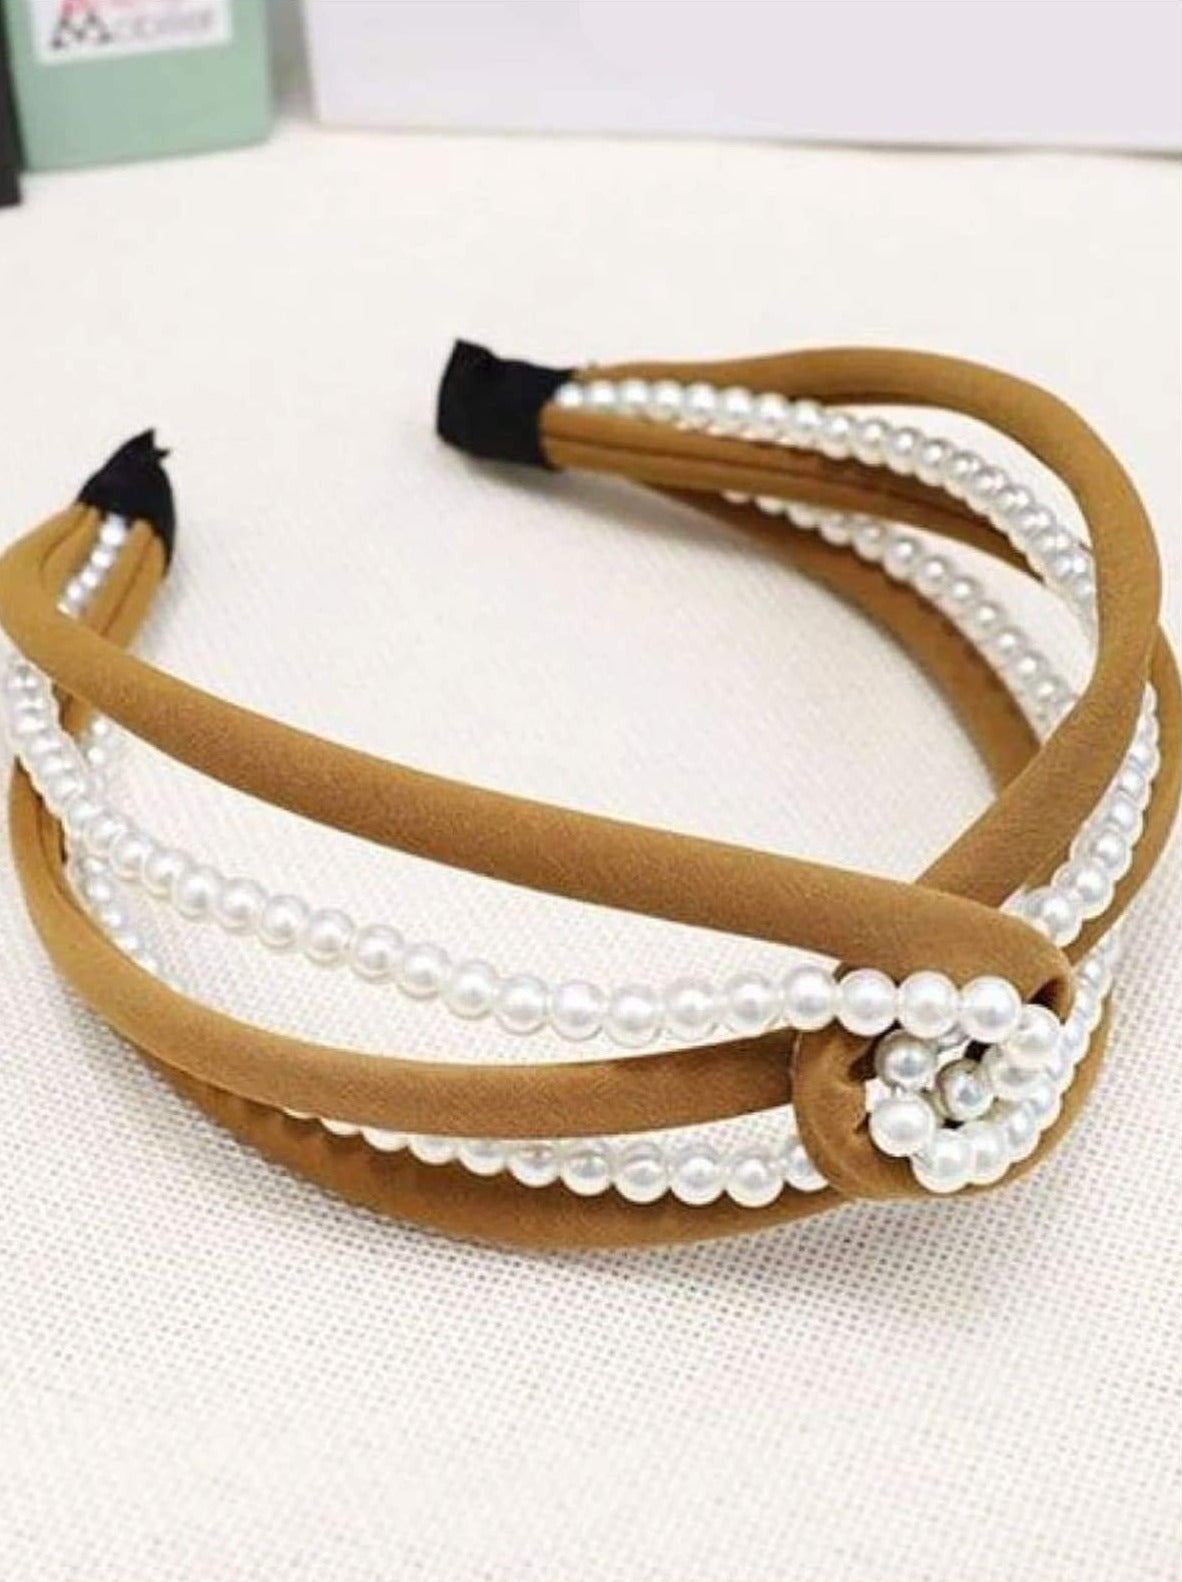 Girls Pearl and Velvet Knot Headband - Brown - Hair Accessories